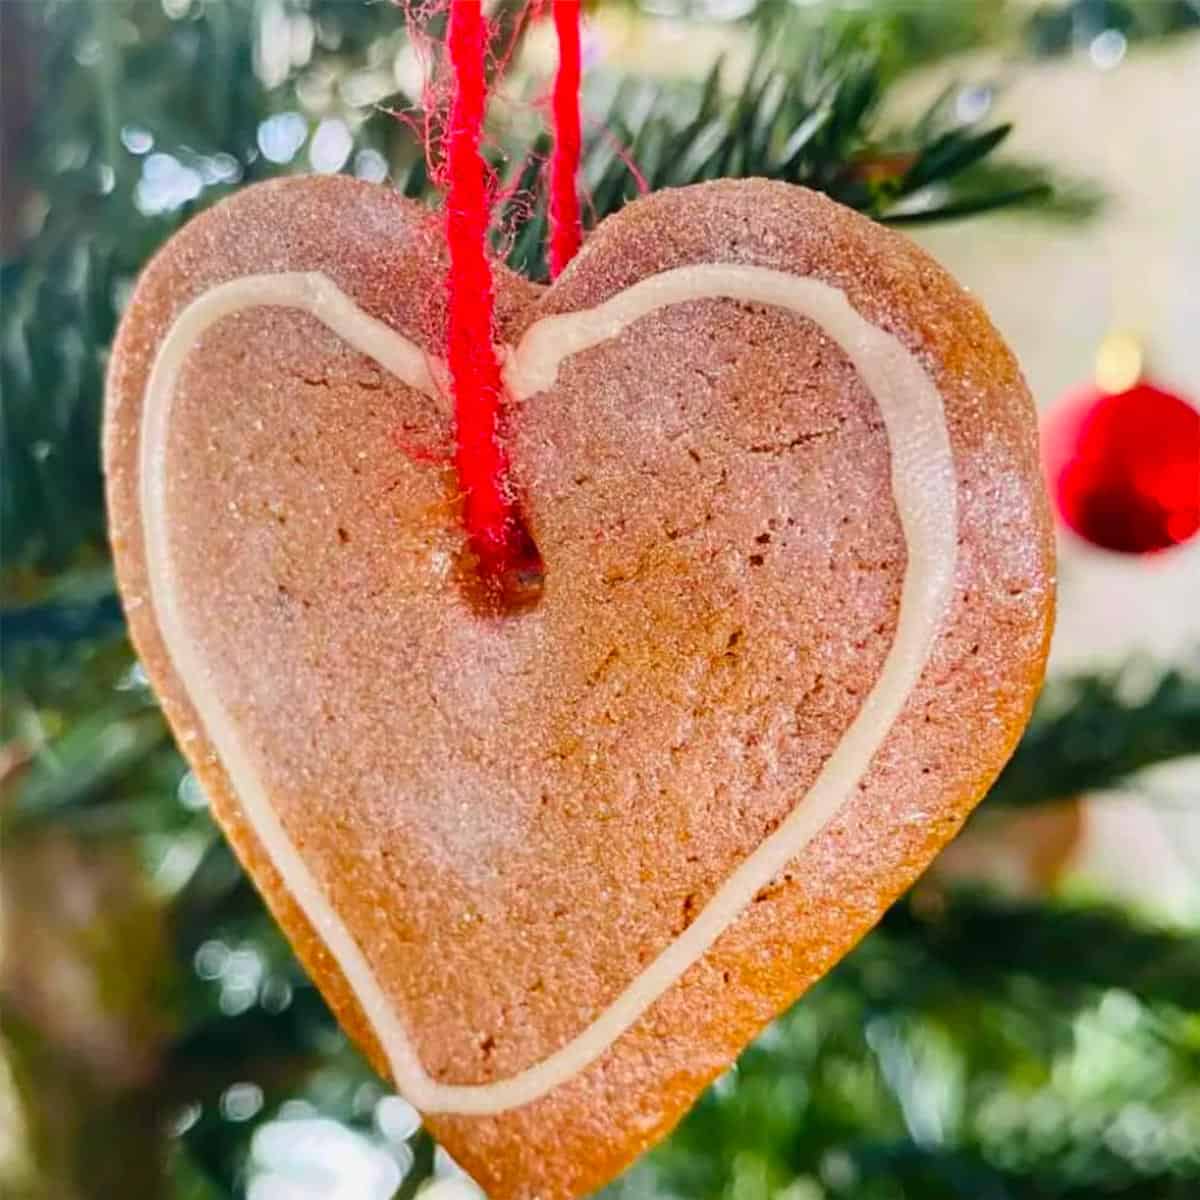 An edible Christmas tree ornament hanging from a tree.